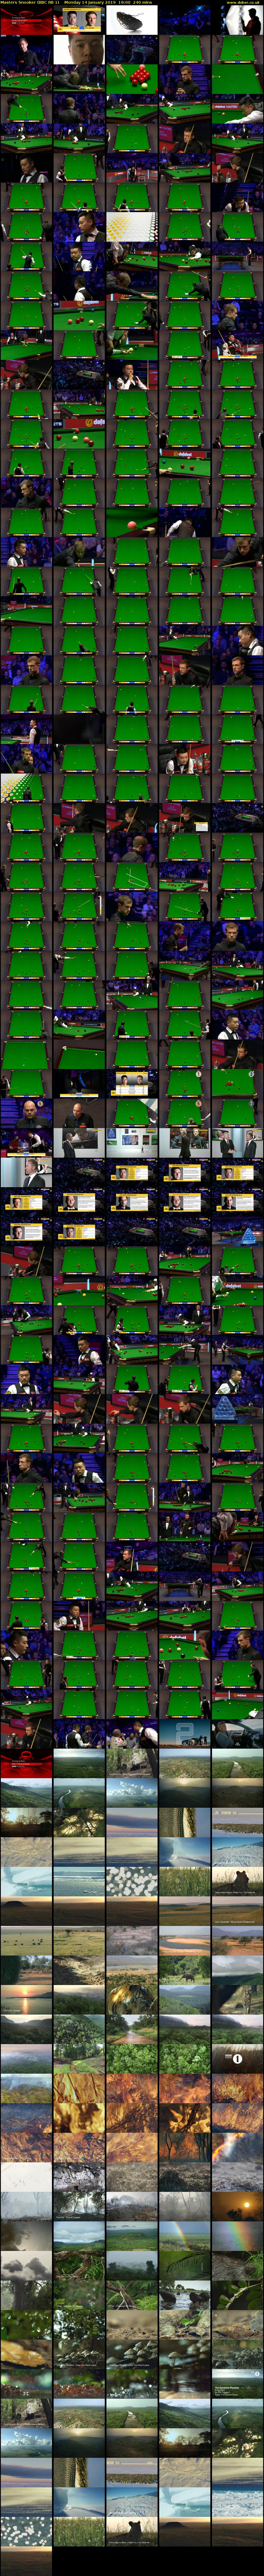 Masters Snooker (BBC RB 1) Monday 14 January 2019 19:00 - 23:00